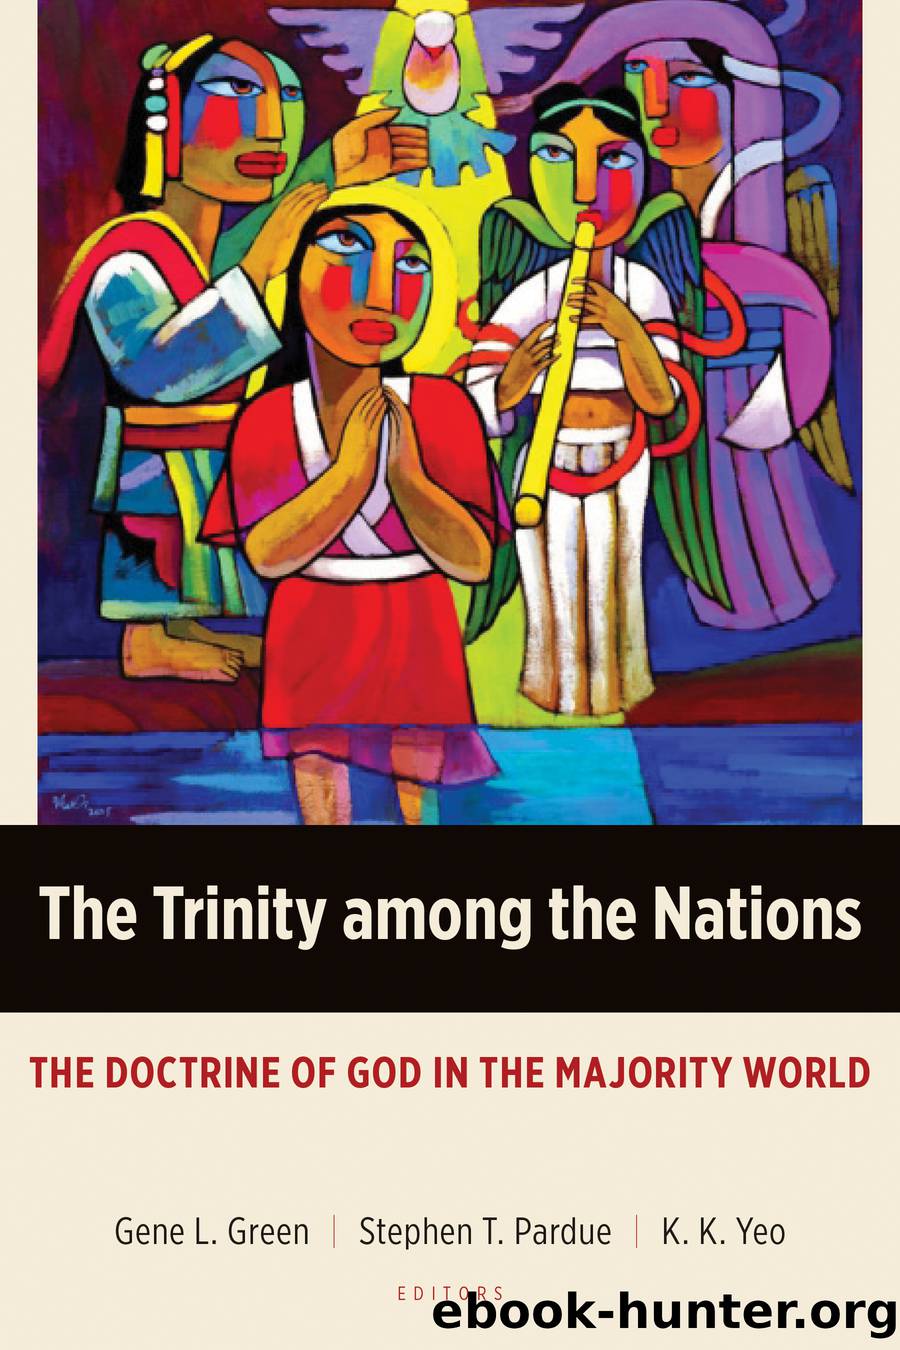 The Trinity among the Nations by Green Gene L.;Pardue Stephen T.;Yeo K. K.;